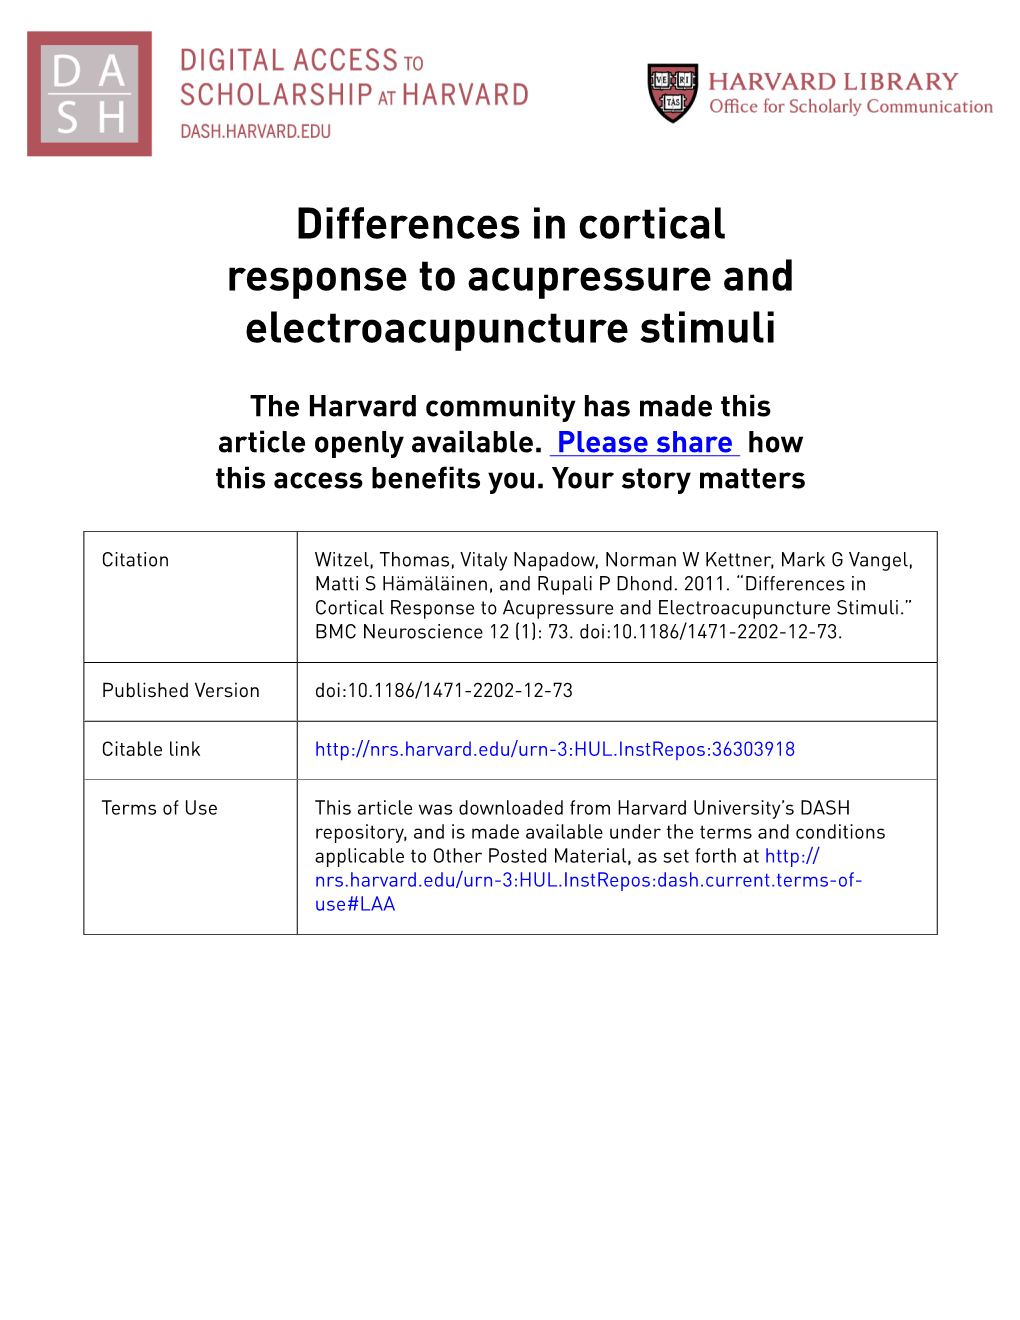 Differences in Cortical Response to Acupressure and Electroacupuncture Stimuli